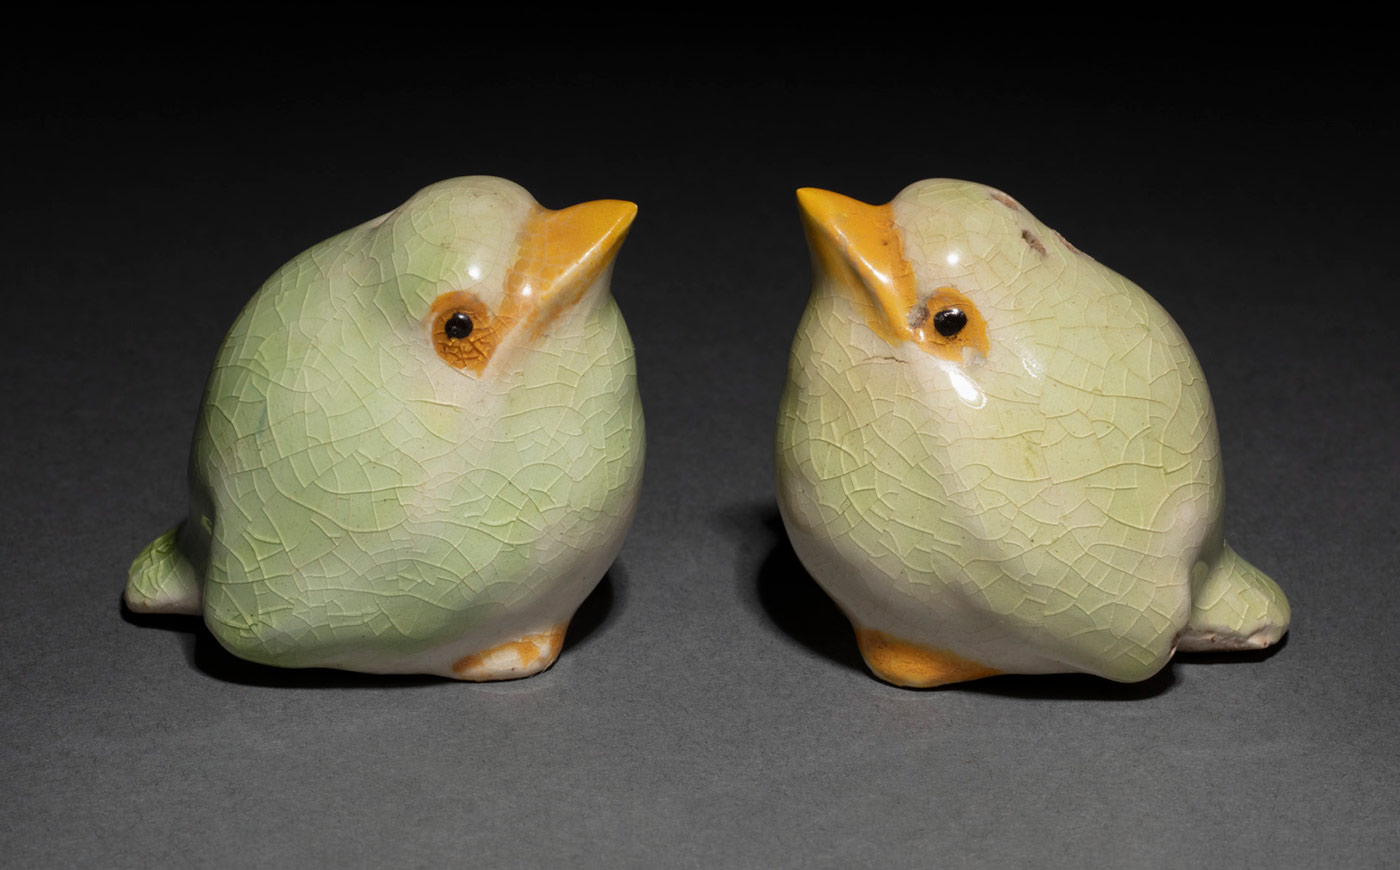 A pair of baby kookaburra salt and pepper shakers. They are a green in colour with yellow beaks.